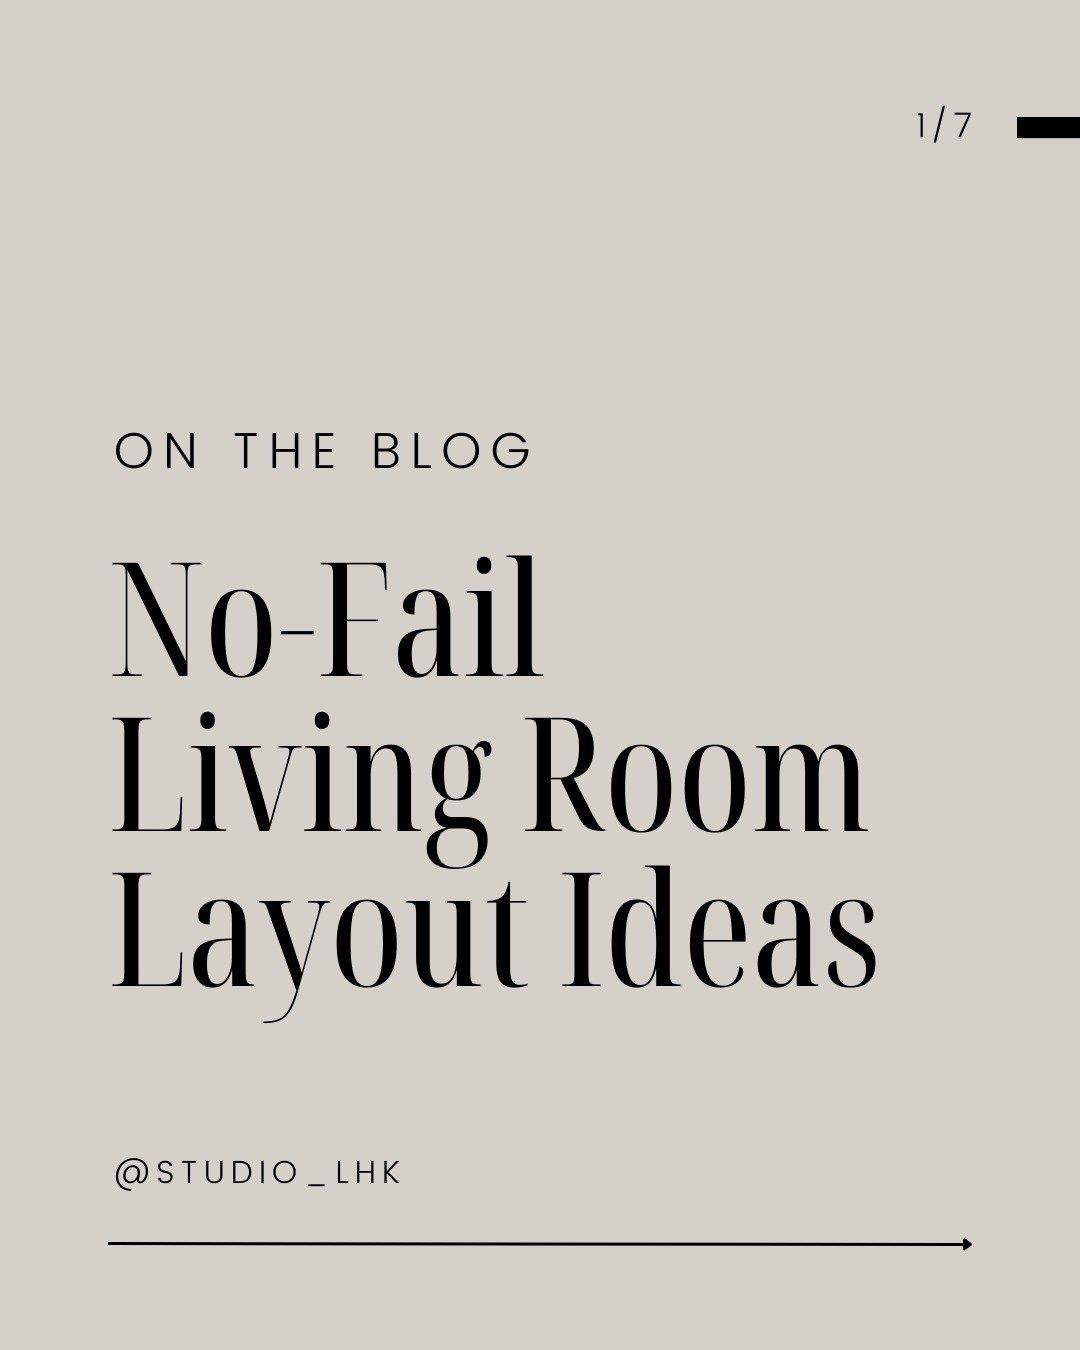 Struggling with your living room layout?🤔
Swipe for no-fail living room layout ideas👉🏻
Head to the link in bio for the full blog post!
.
.
#livingroomlayout #livingroominteriors #livingroomtips #homeinterior #interiordesign